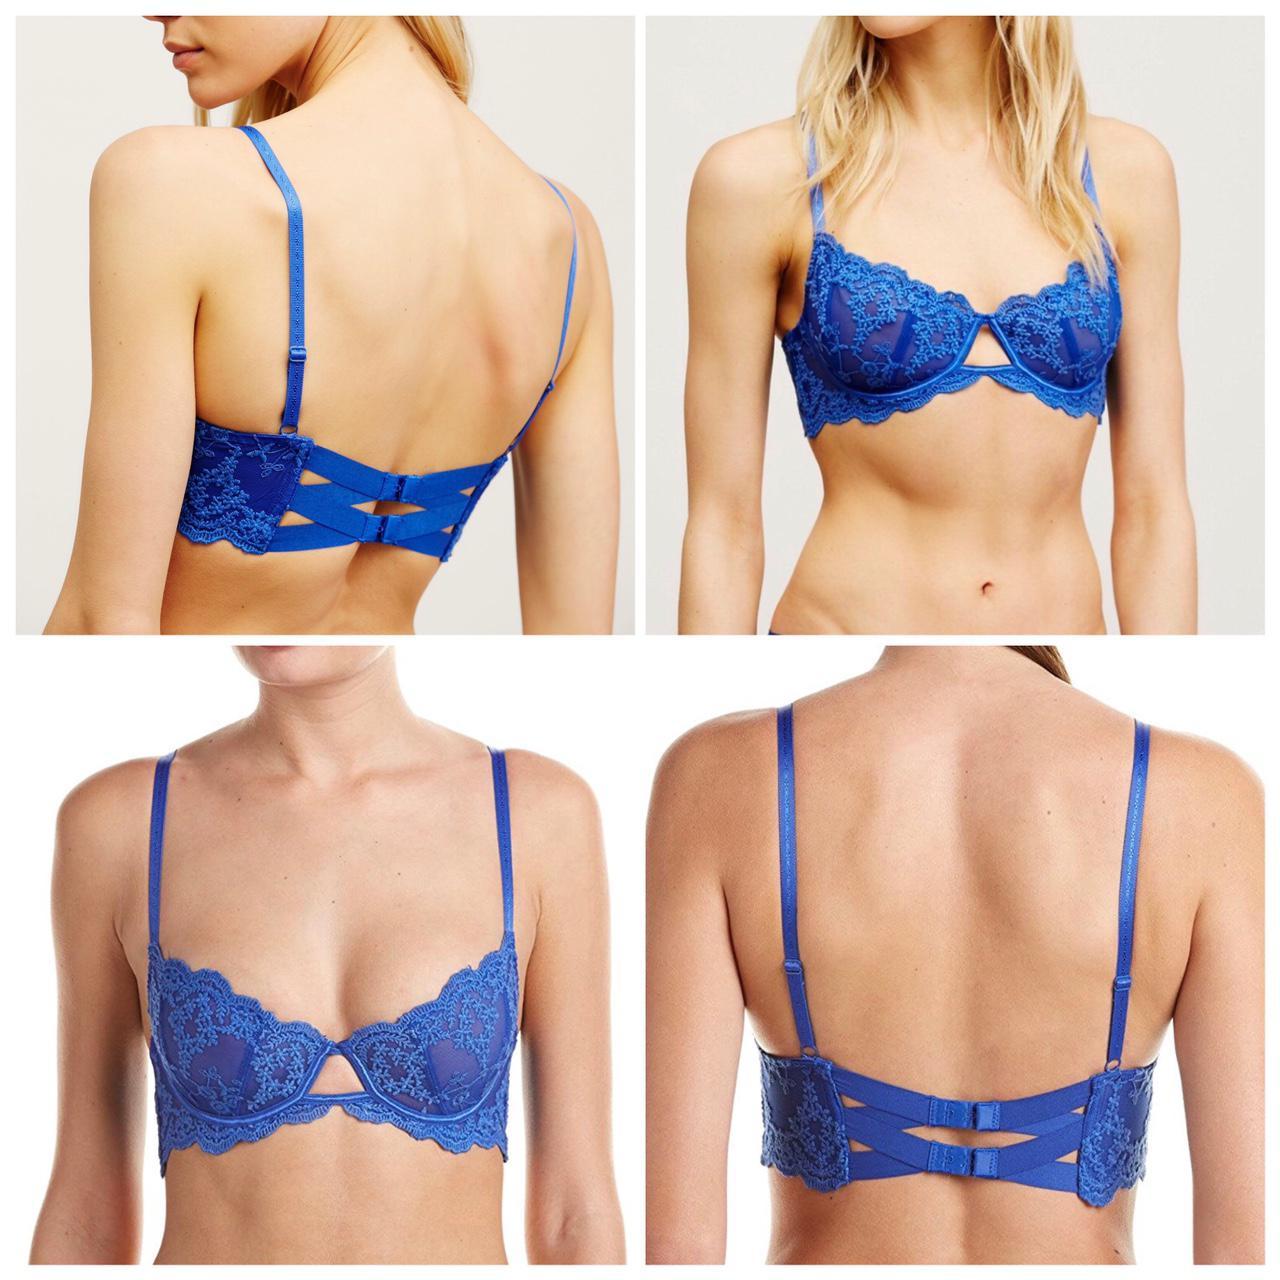 Free People NWT Amelie Lace Bralette in Dazzling Blue size XL - $32 New  With Tags - From Mallory